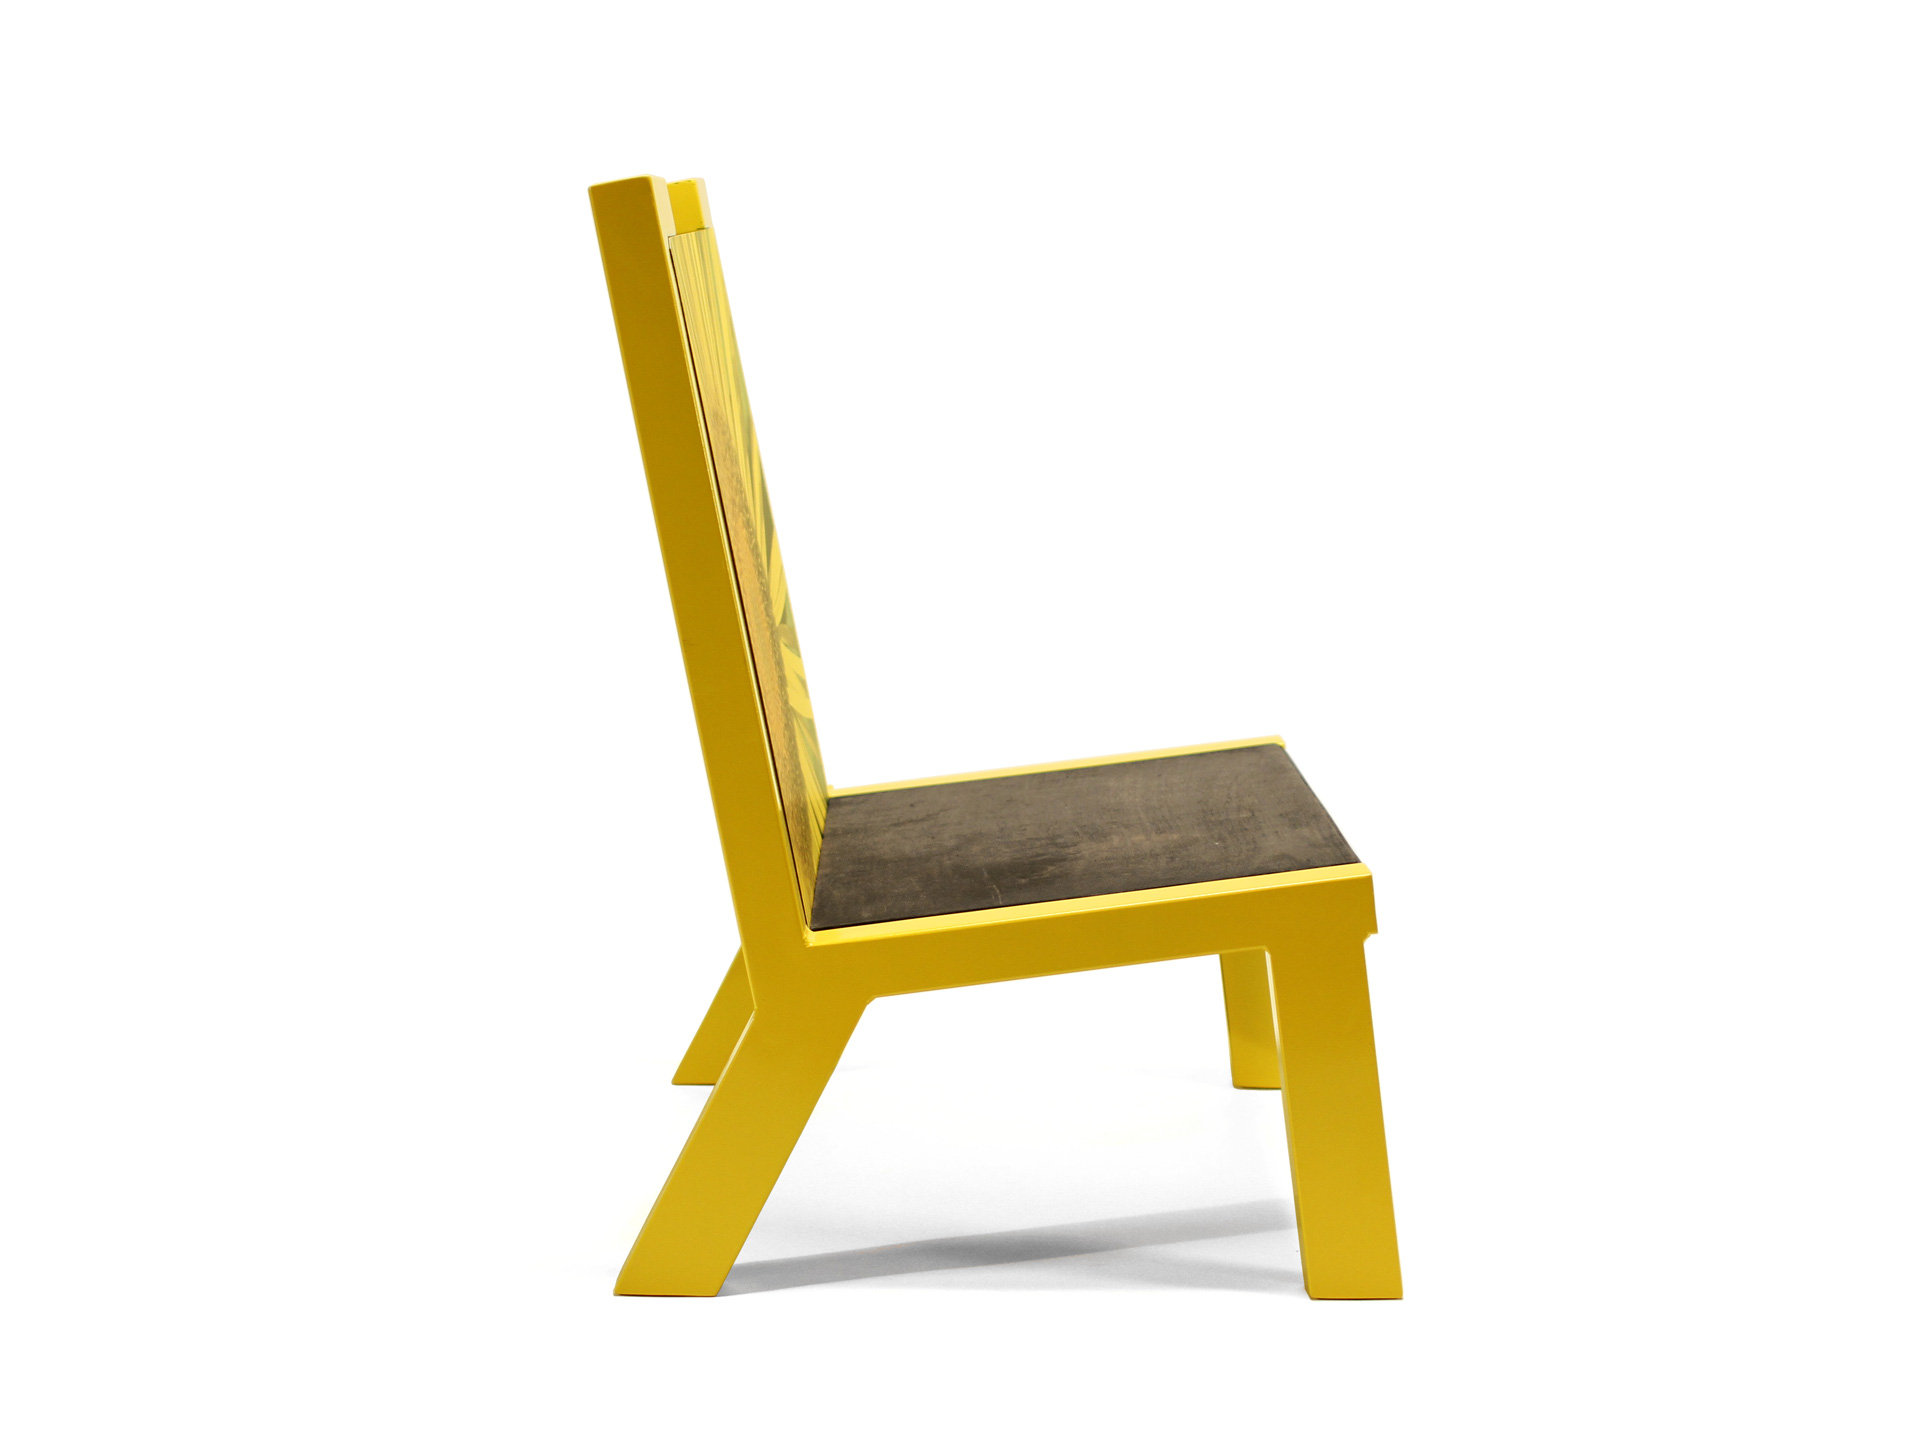 Camelback chair in yellow shown from the side